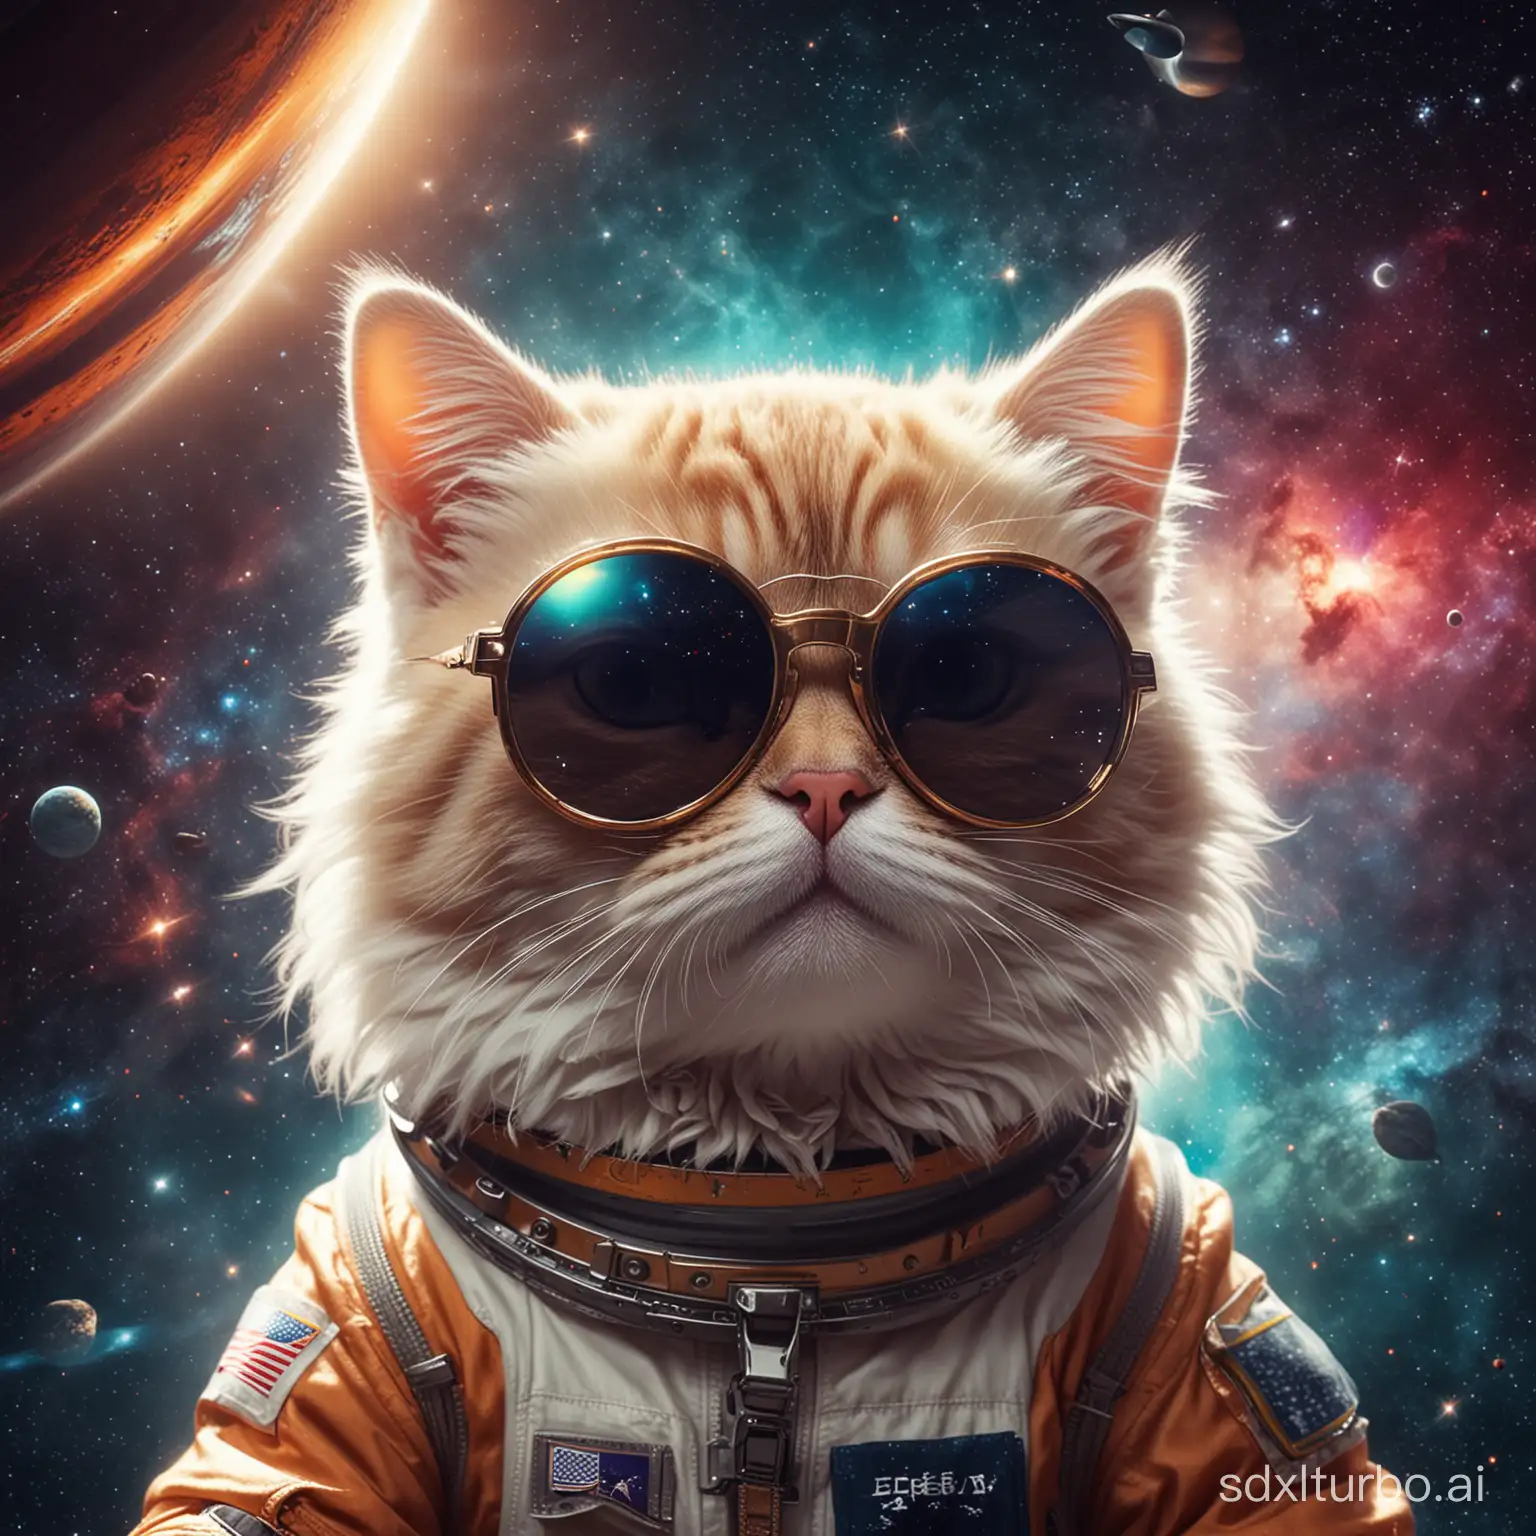 cinematic style, a kitty using sunglasses fly on space, saturn behide